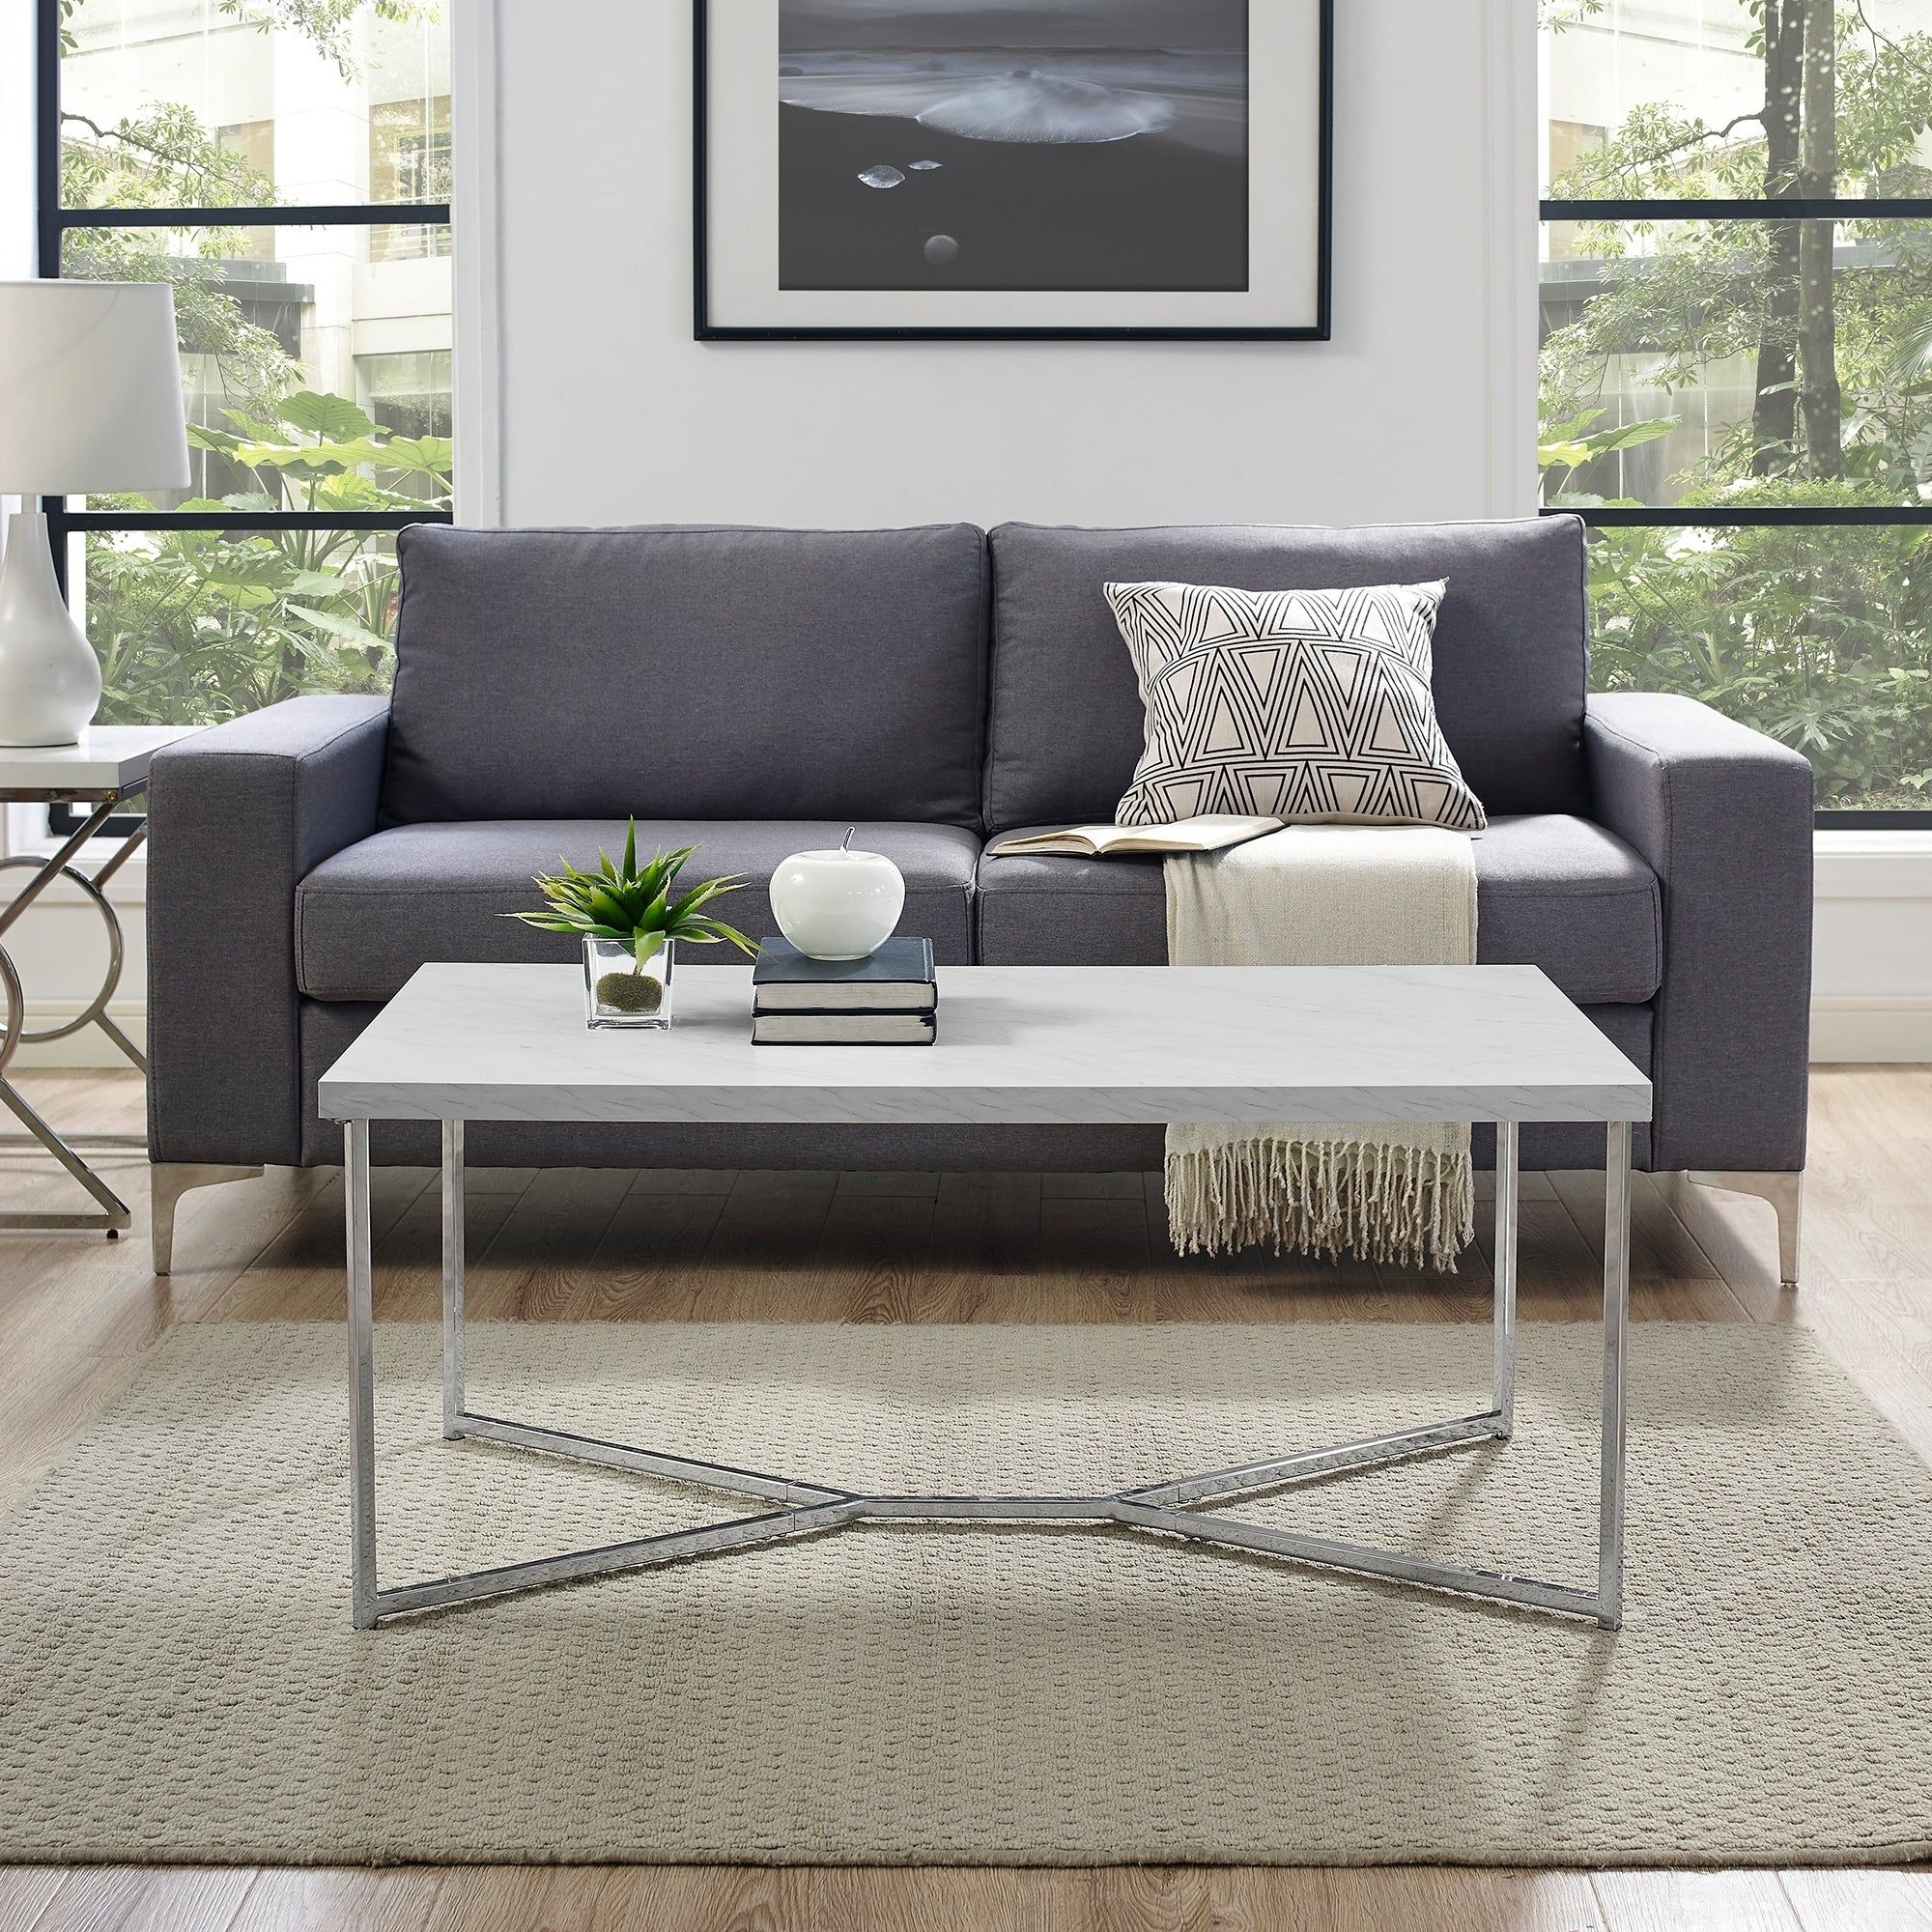 Silver Orchid Ipsen 42 Inch Modern Rectangular Coffee Table – 42 X 22 X 18h Inside Best And Newest Silver Orchid Ipsen Contemporary Glass Top Coffee Tables (View 13 of 20)